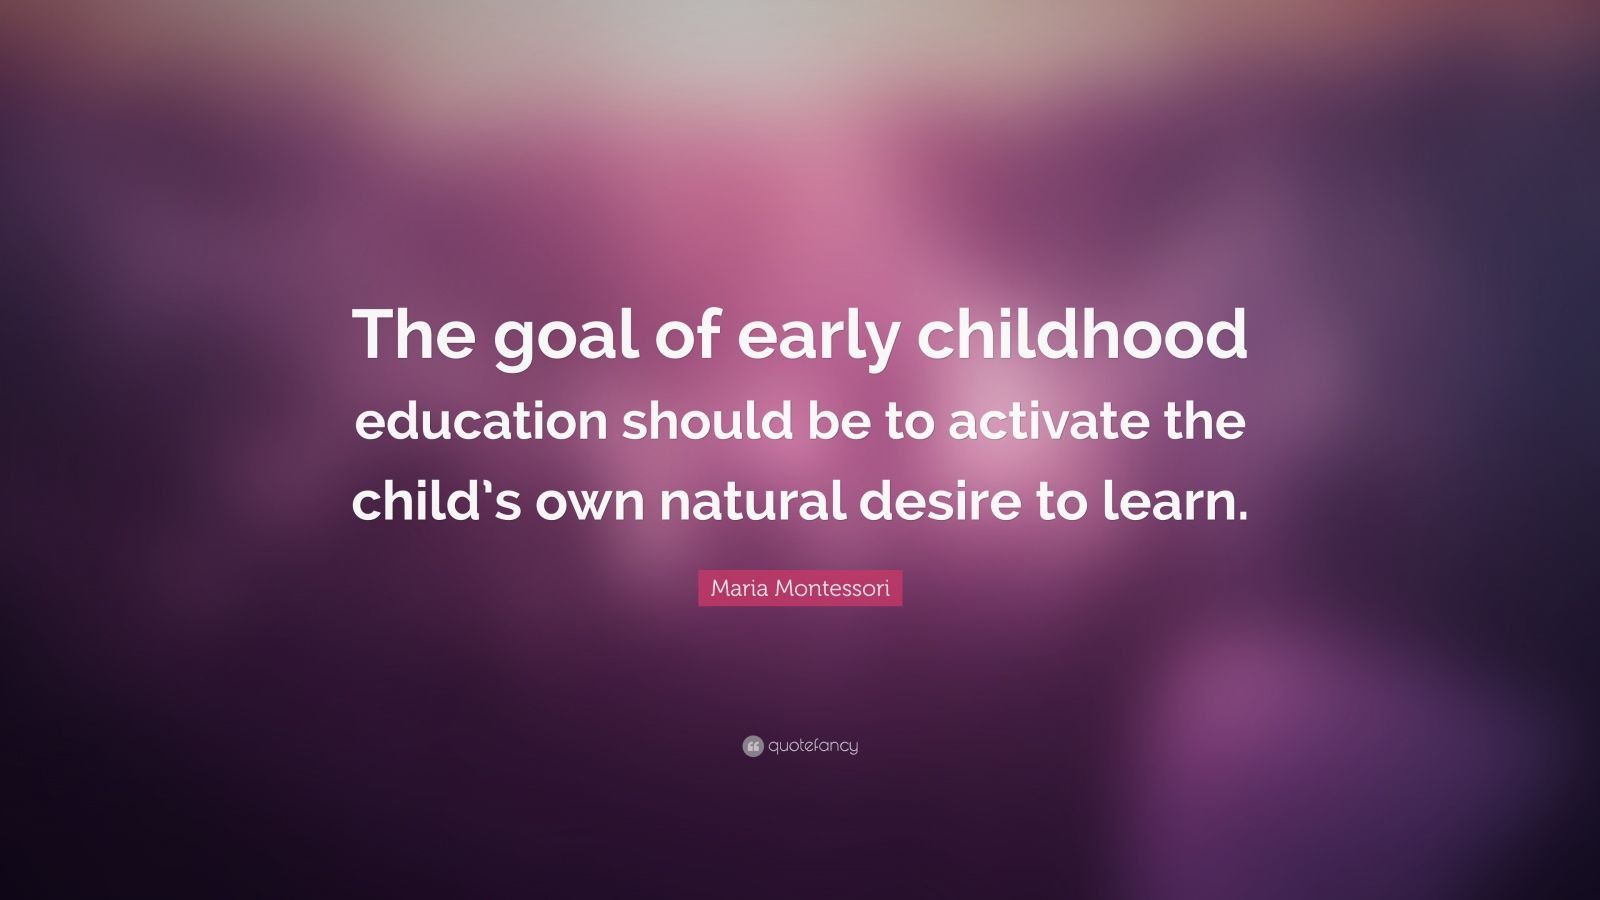 Quote About Early Childhood Education
 Maria Montessori Quote “The goal of early childhood